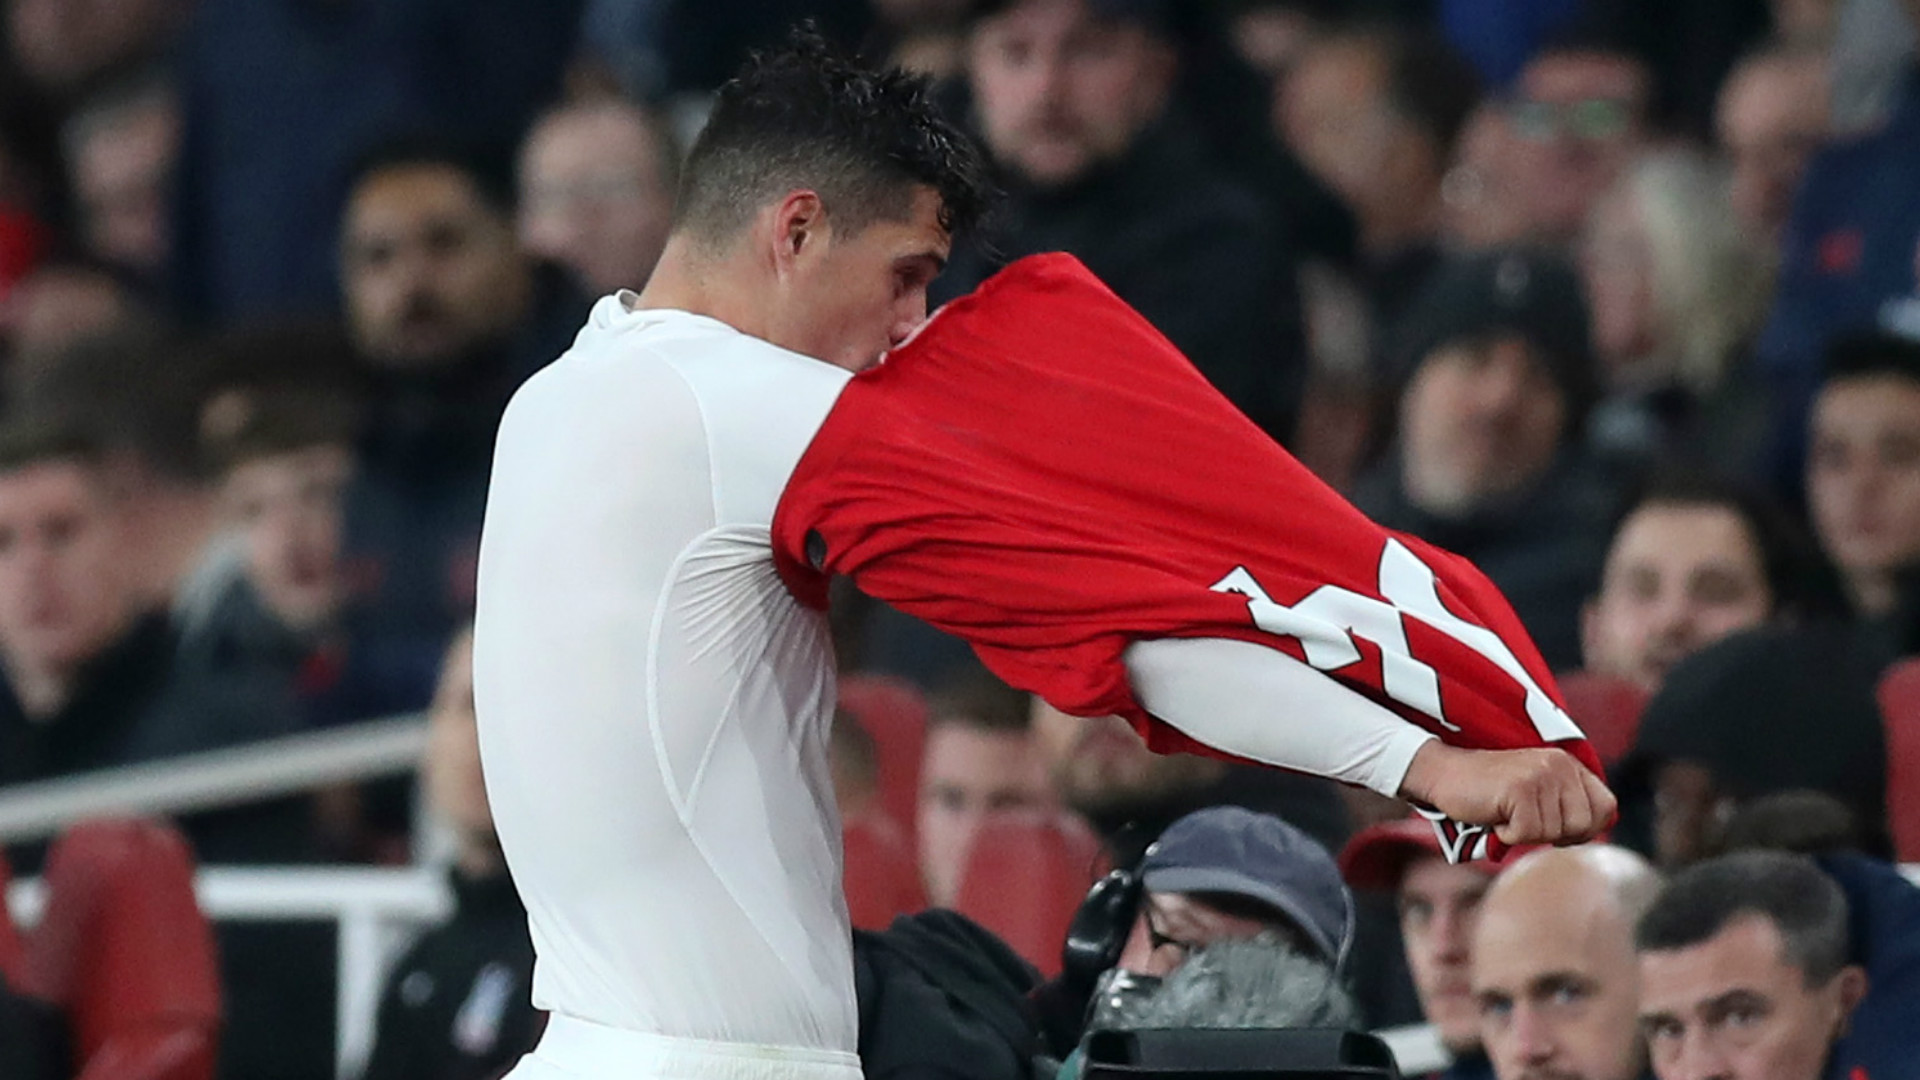 Xhaka tells Arsenal to 'f*ck off' after being substituted as he storms off | Goal.com